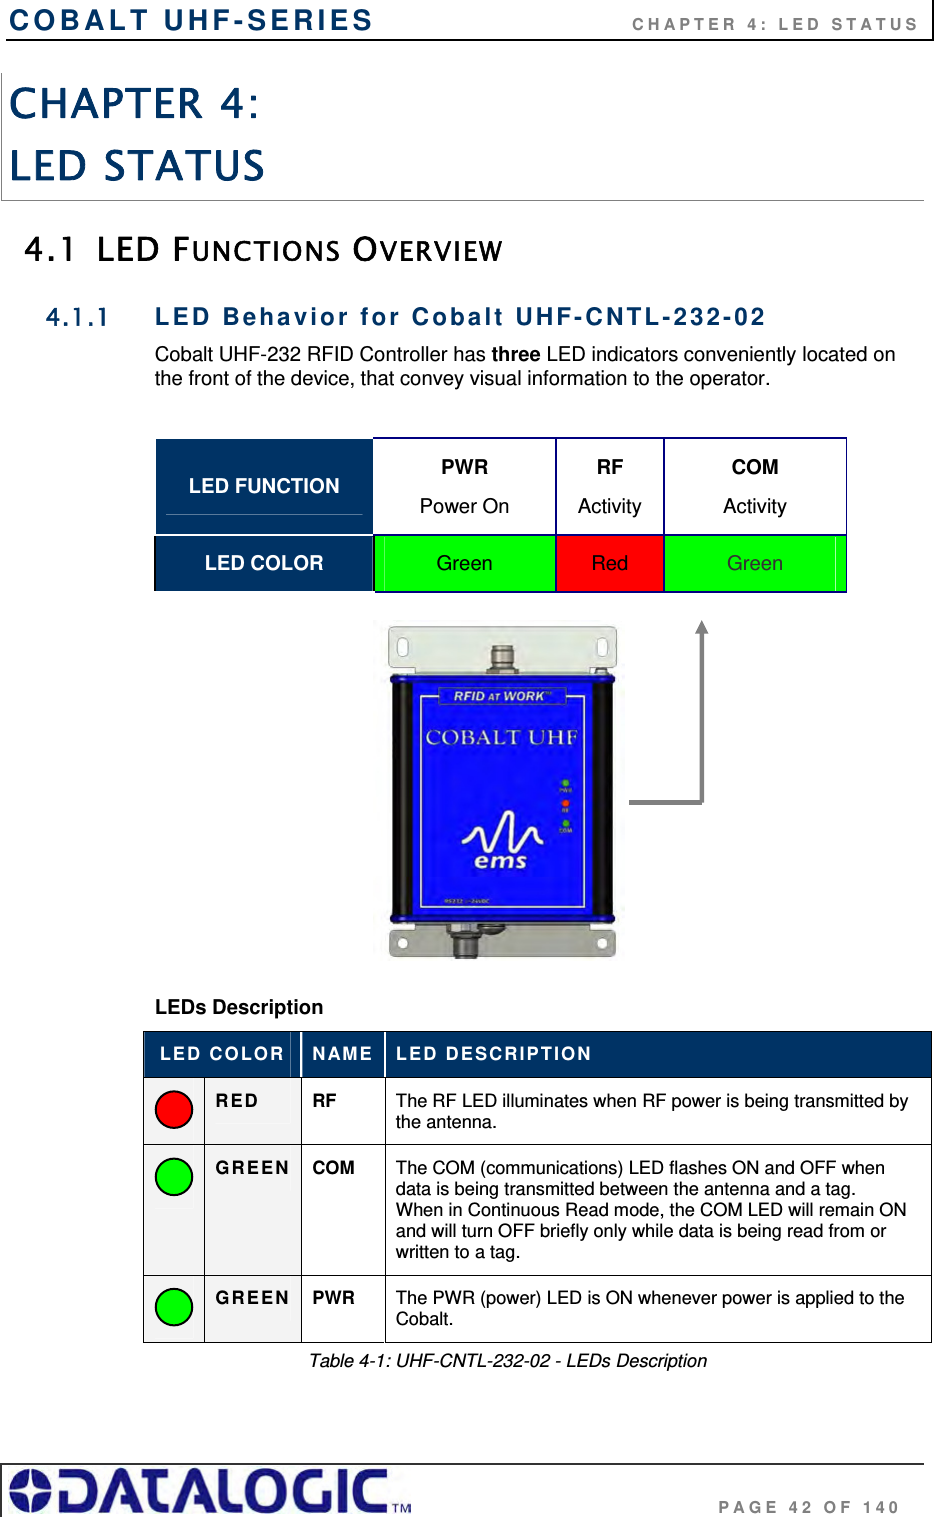 COBALT UHF-SERIES    CHAPTER 4: LED STATUS                                     PAGE 42 OF 140 CHAPTER 4:  LED STATUS 4.1 LED FUNCTIONS OVERVIEW  4.1.1  LED Behavior for Cobalt UHF-CNTL-232-02 Cobalt UHF-232 RFID Controller has three LED indicators conveniently located on the front of the device, that convey visual information to the operator.   LED FUNCTION  PWR Power On RF Activity COM Activity LED COLOR  Green  Red  Green            LEDs Description LED COLOR  NAME  LED DESCRIPTION   RED RF  The RF LED illuminates when RF power is being transmitted by the antenna.   GREEN COM  The COM (communications) LED flashes ON and OFF when data is being transmitted between the antenna and a tag.  When in Continuous Read mode, the COM LED will remain ON and will turn OFF briefly only while data is being read from or written to a tag.    GREEN PWR  The PWR (power) LED is ON whenever power is applied to the Cobalt.                                                            Table 4-1: UHF-CNTL-232-02 - LEDs Description  